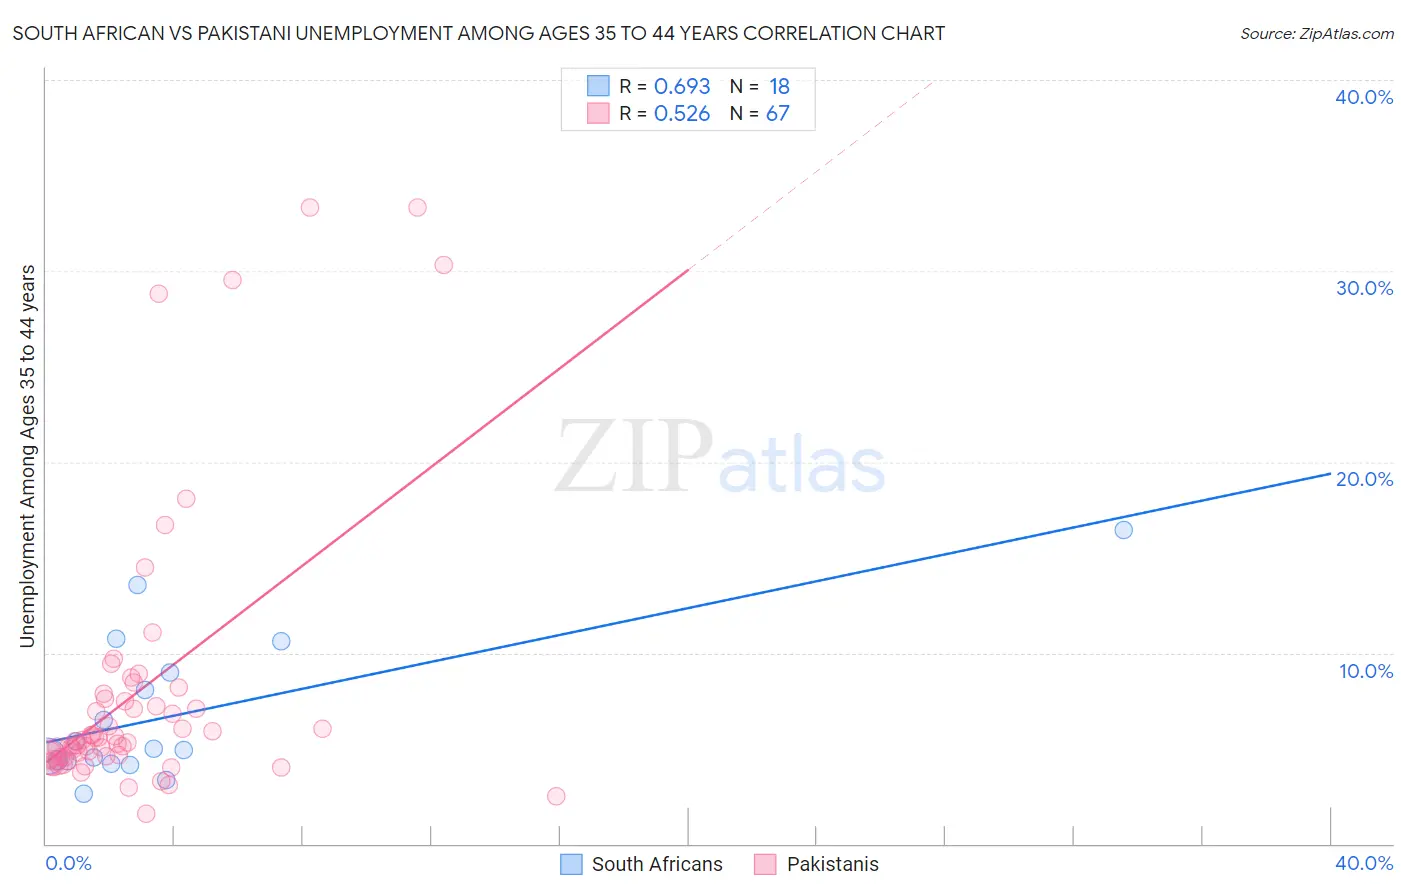 South African vs Pakistani Unemployment Among Ages 35 to 44 years